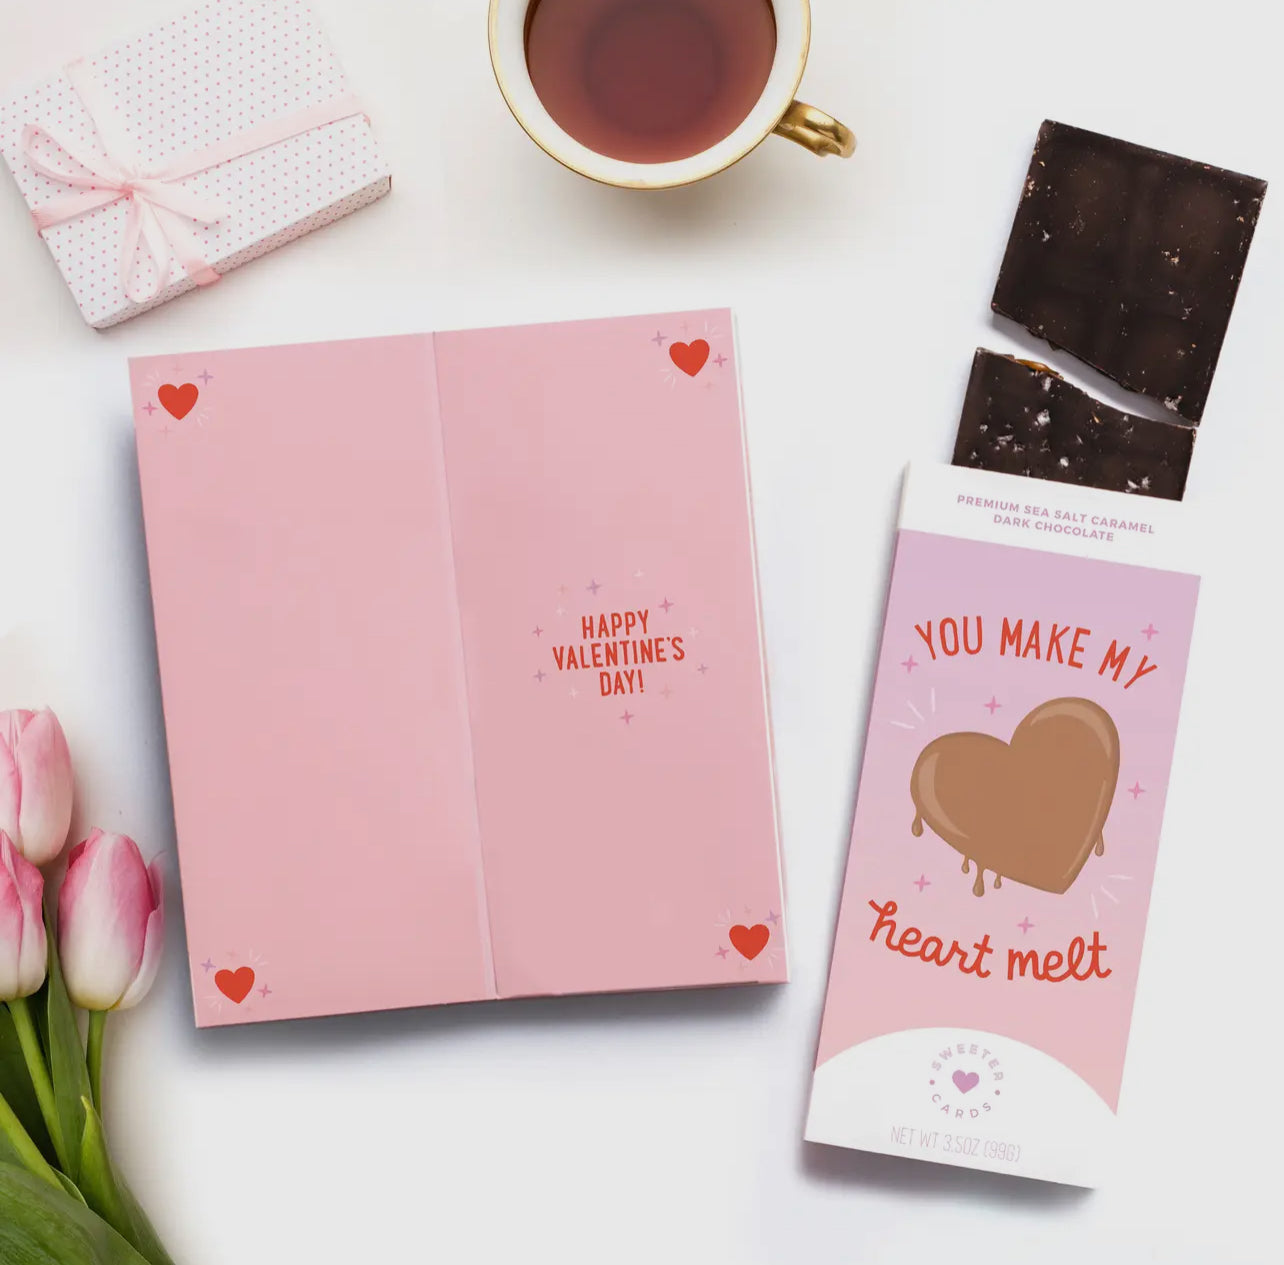 YOU MAKE MY HEART MELT - Valentine's Day Card with Chocolate Bar